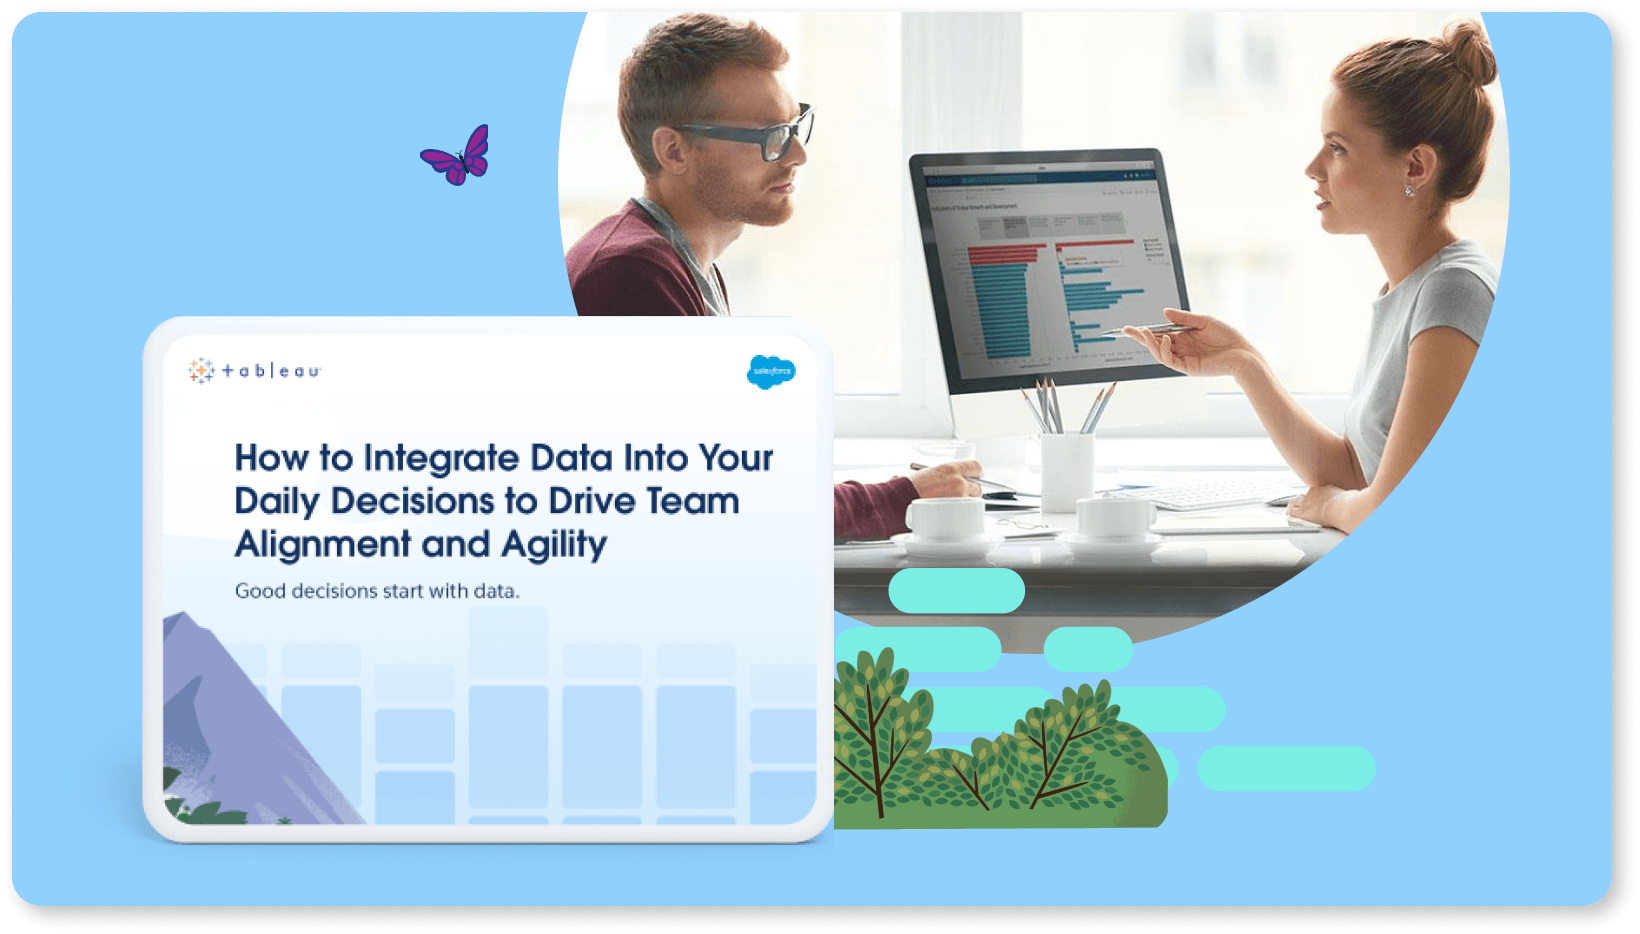 Accéder à How to Integrate Data Into Your Daily Decisions to Drive Team Alignment and Agility